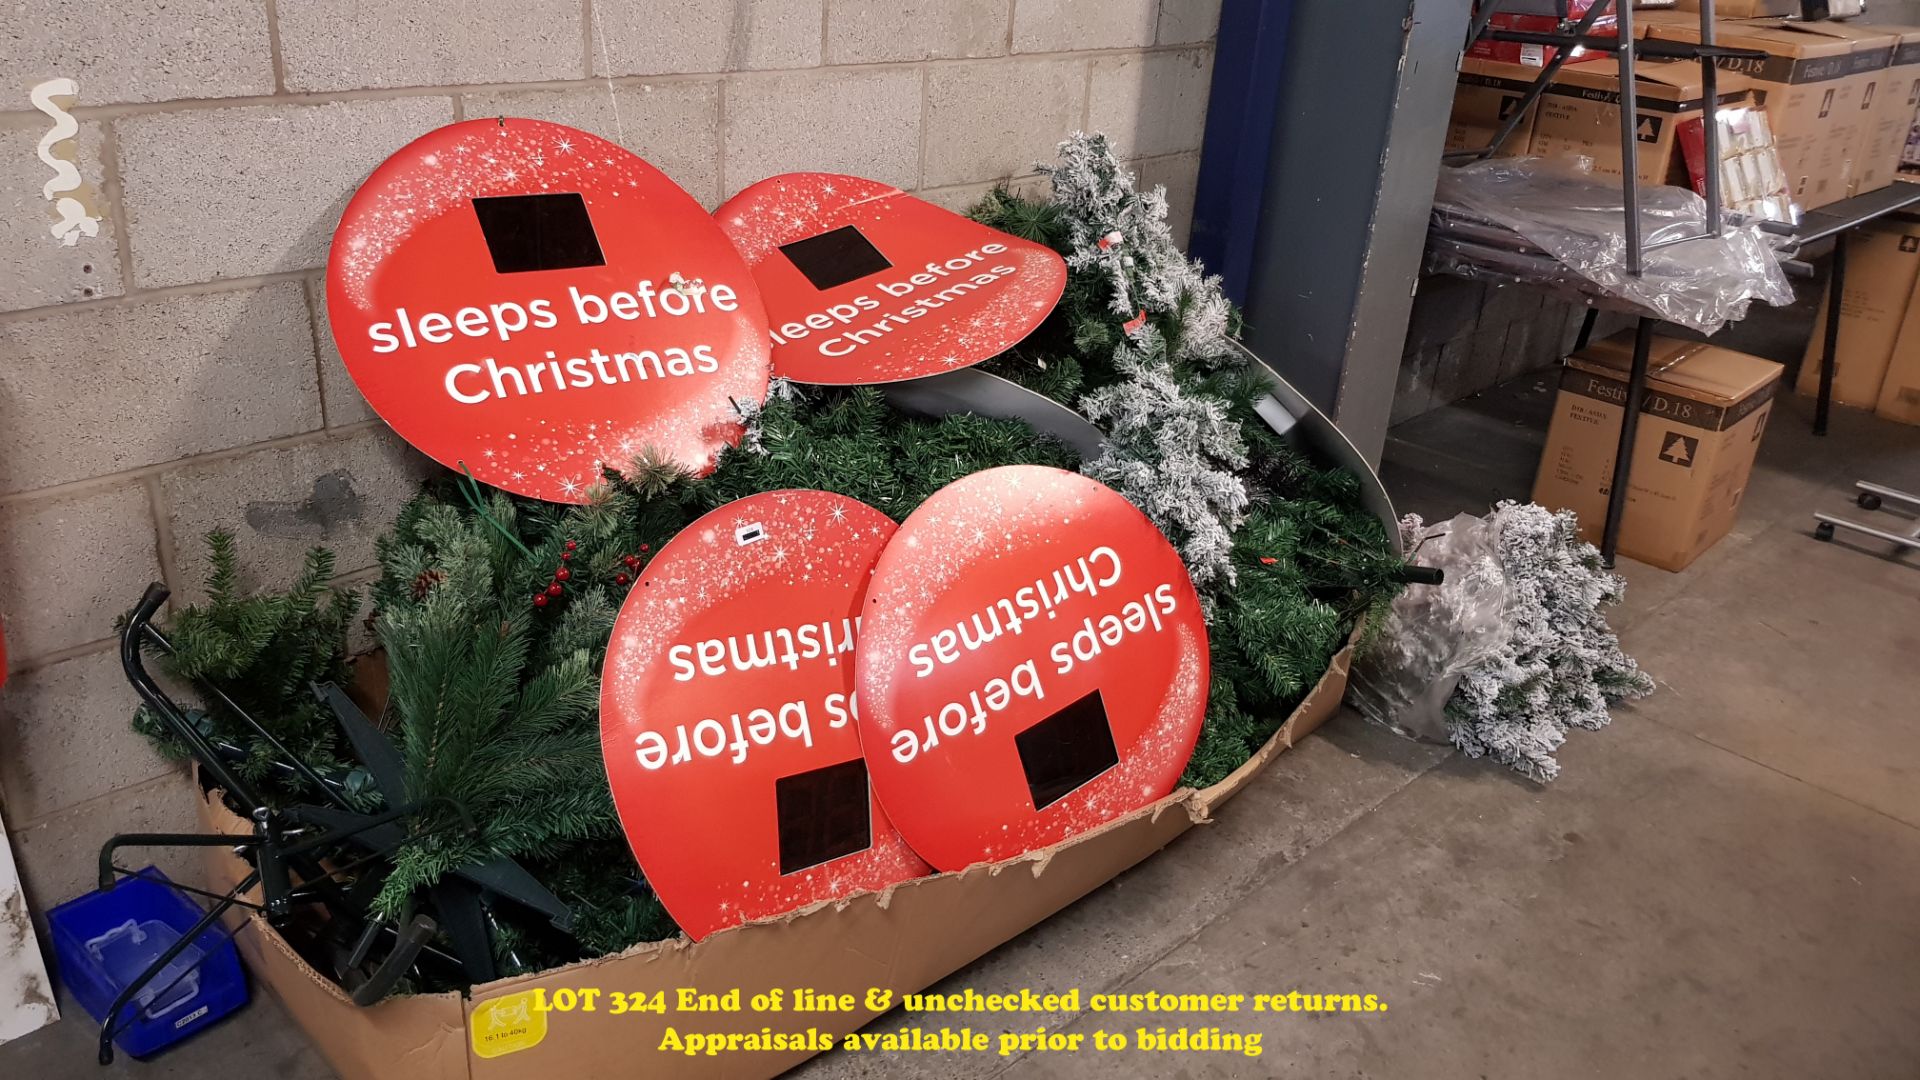 CONTENTS OF VERY LARGE BOX ASSTD CHRISTMAS TREES AND FOUR ELECTRONIC SLEEPS BEFORE CHRISTMAS SIGNS